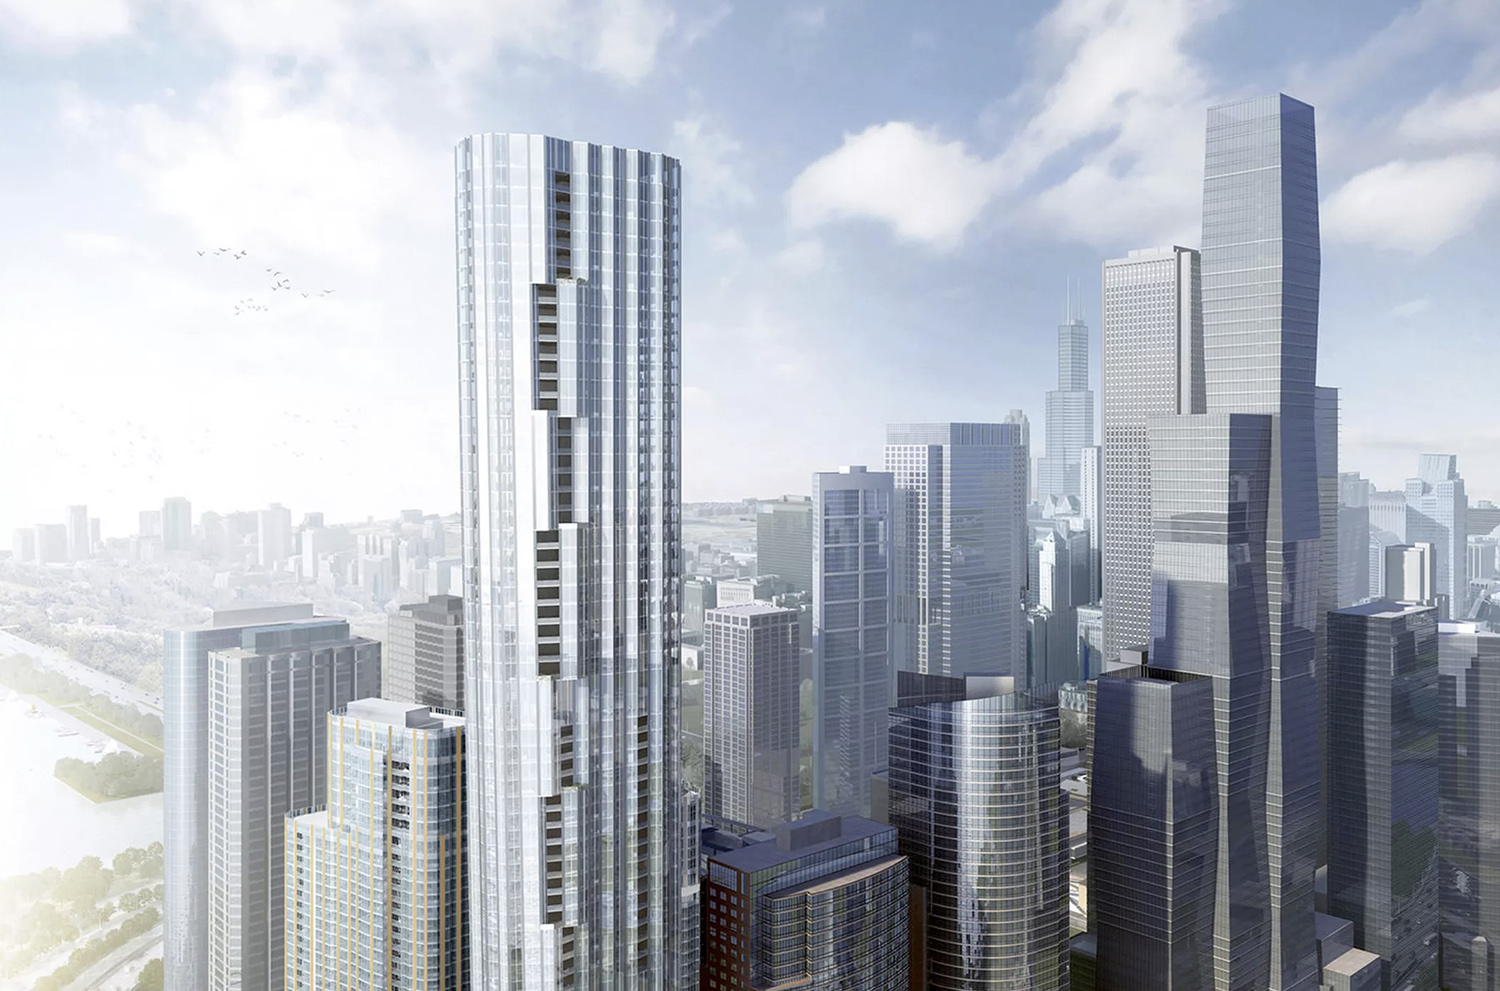 Parcel I at Lakeshore East. Rendering by bKL Architecture